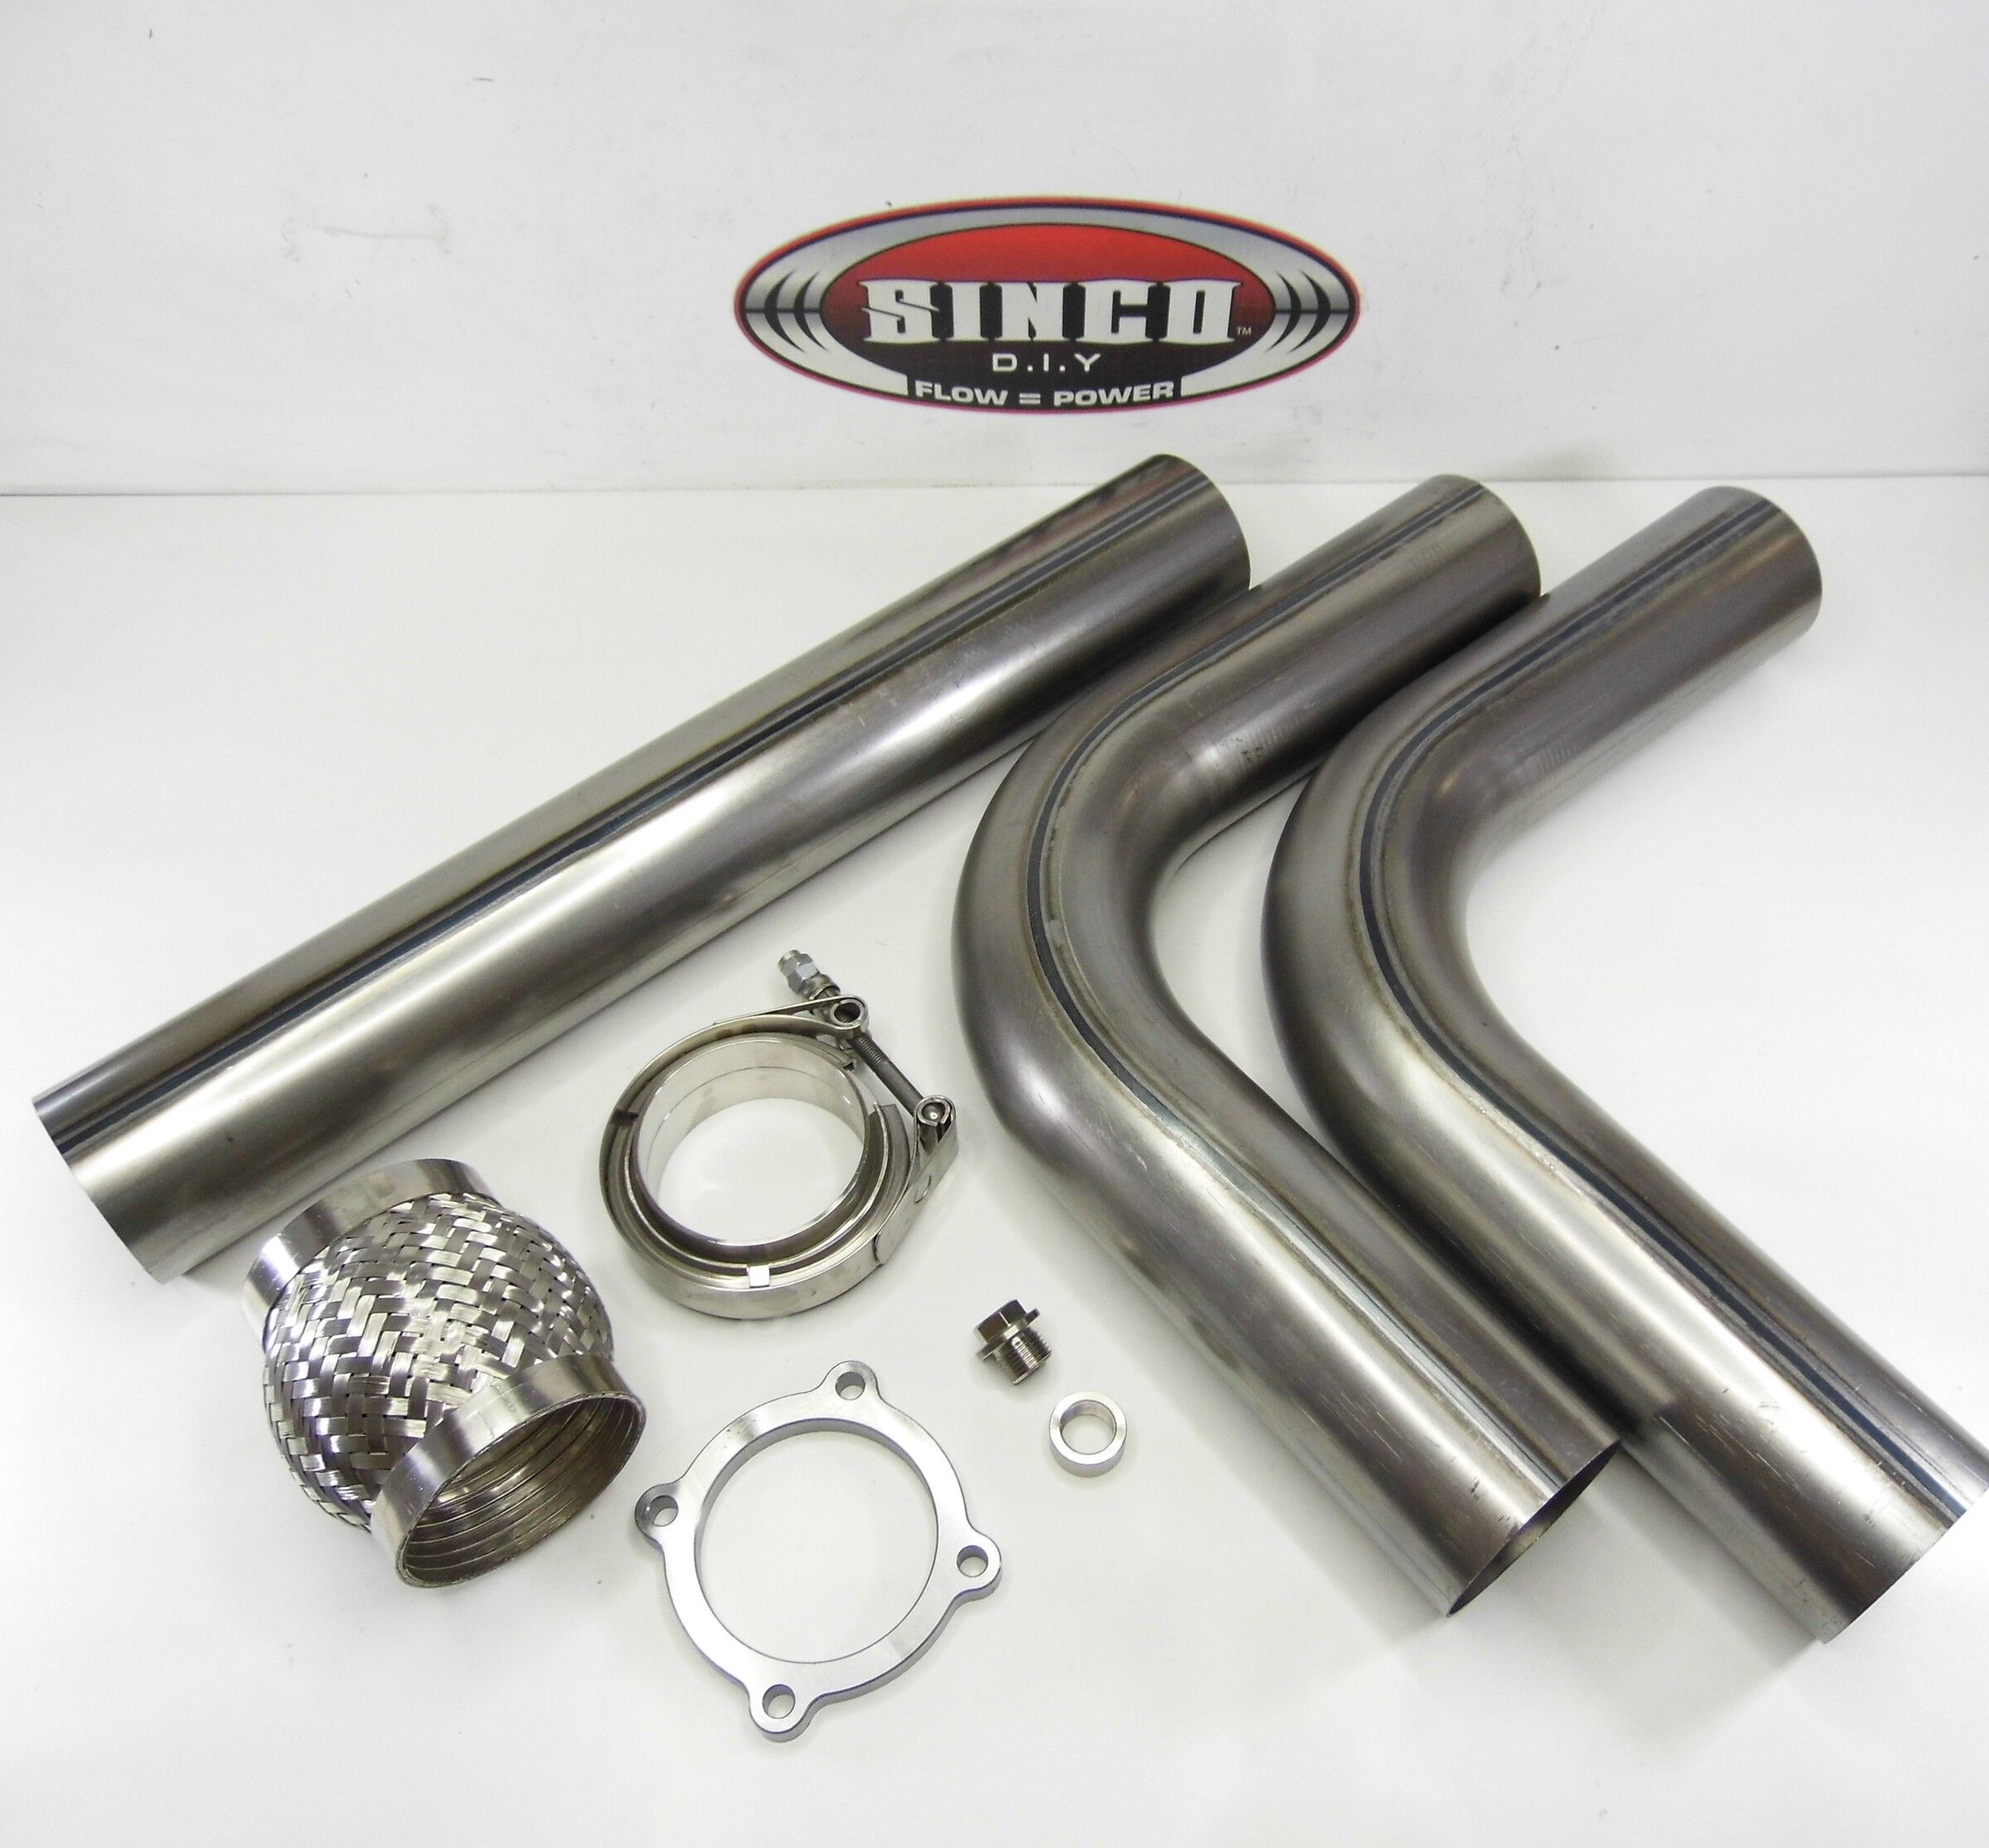 Mild Steel Downpipe Kit  - 2.5&quot; or 3&quot;